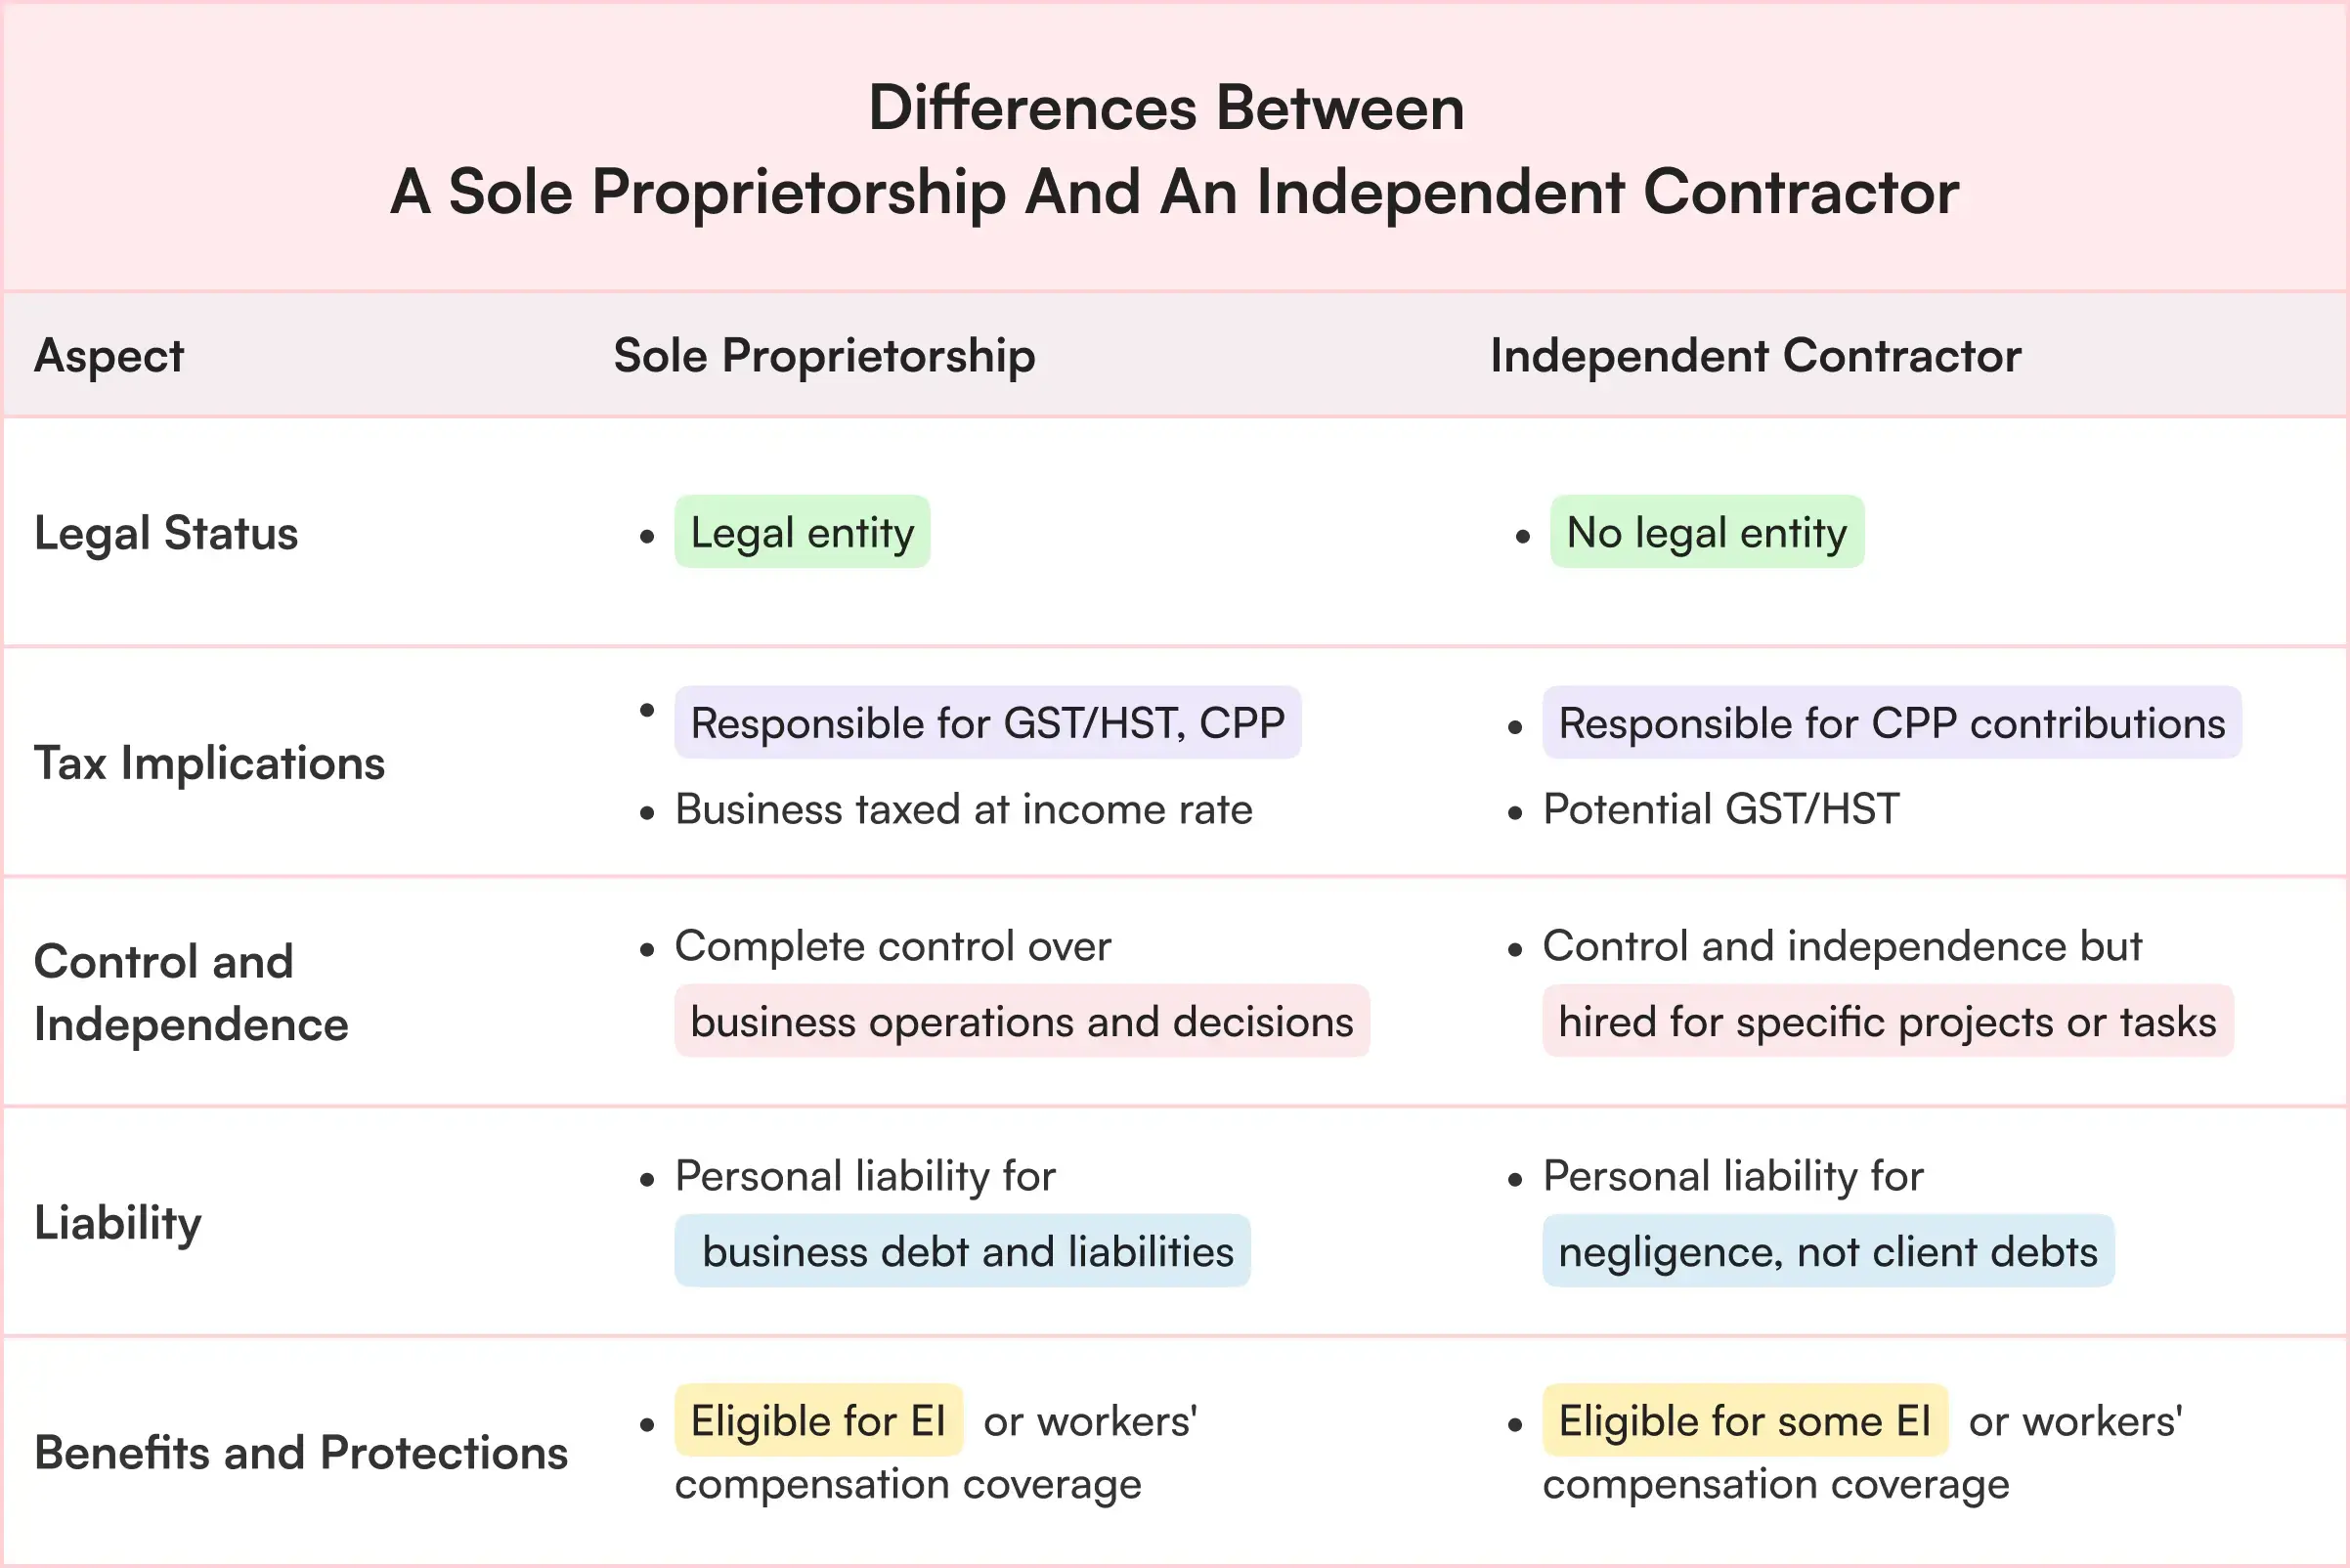 Differences between a sole proprietorship and an independent contractor